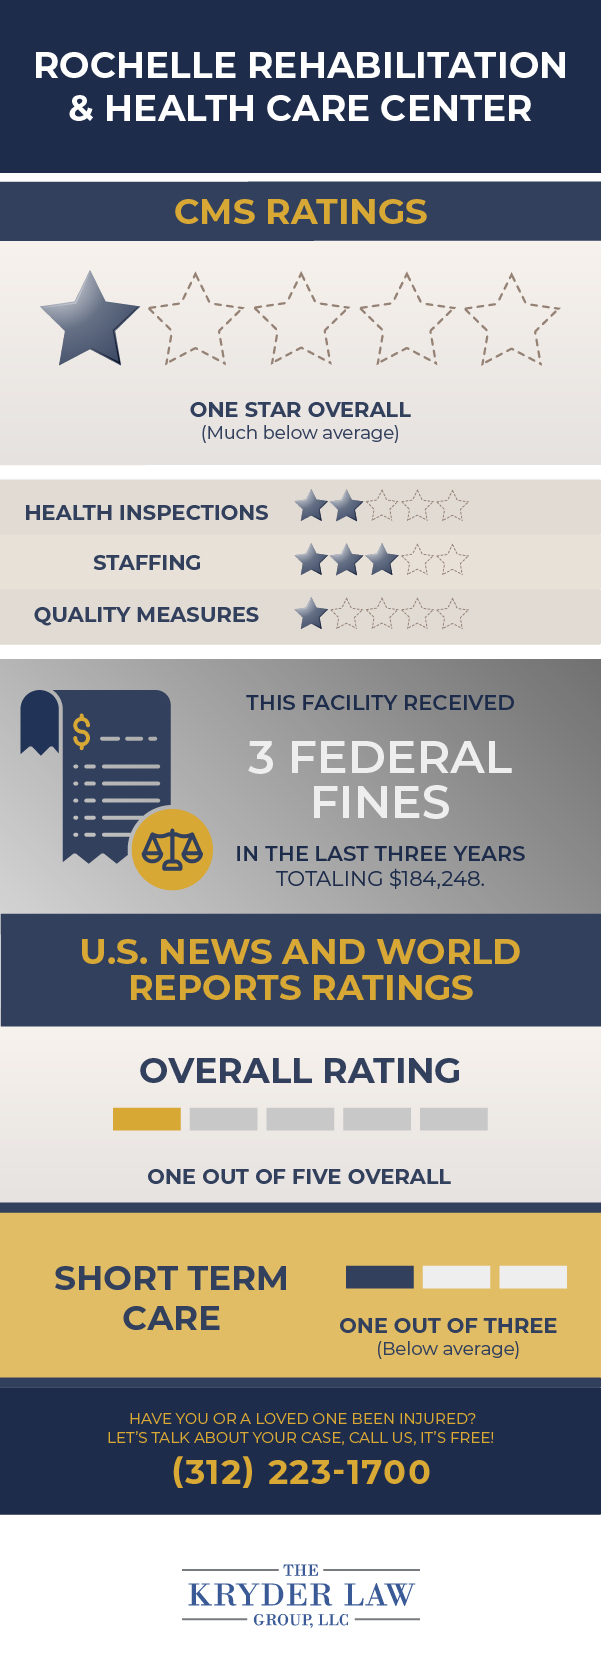 Rochelle Rehabilitation & Health Care Center CMS Ratings and U.S. News and World Reports Ratings